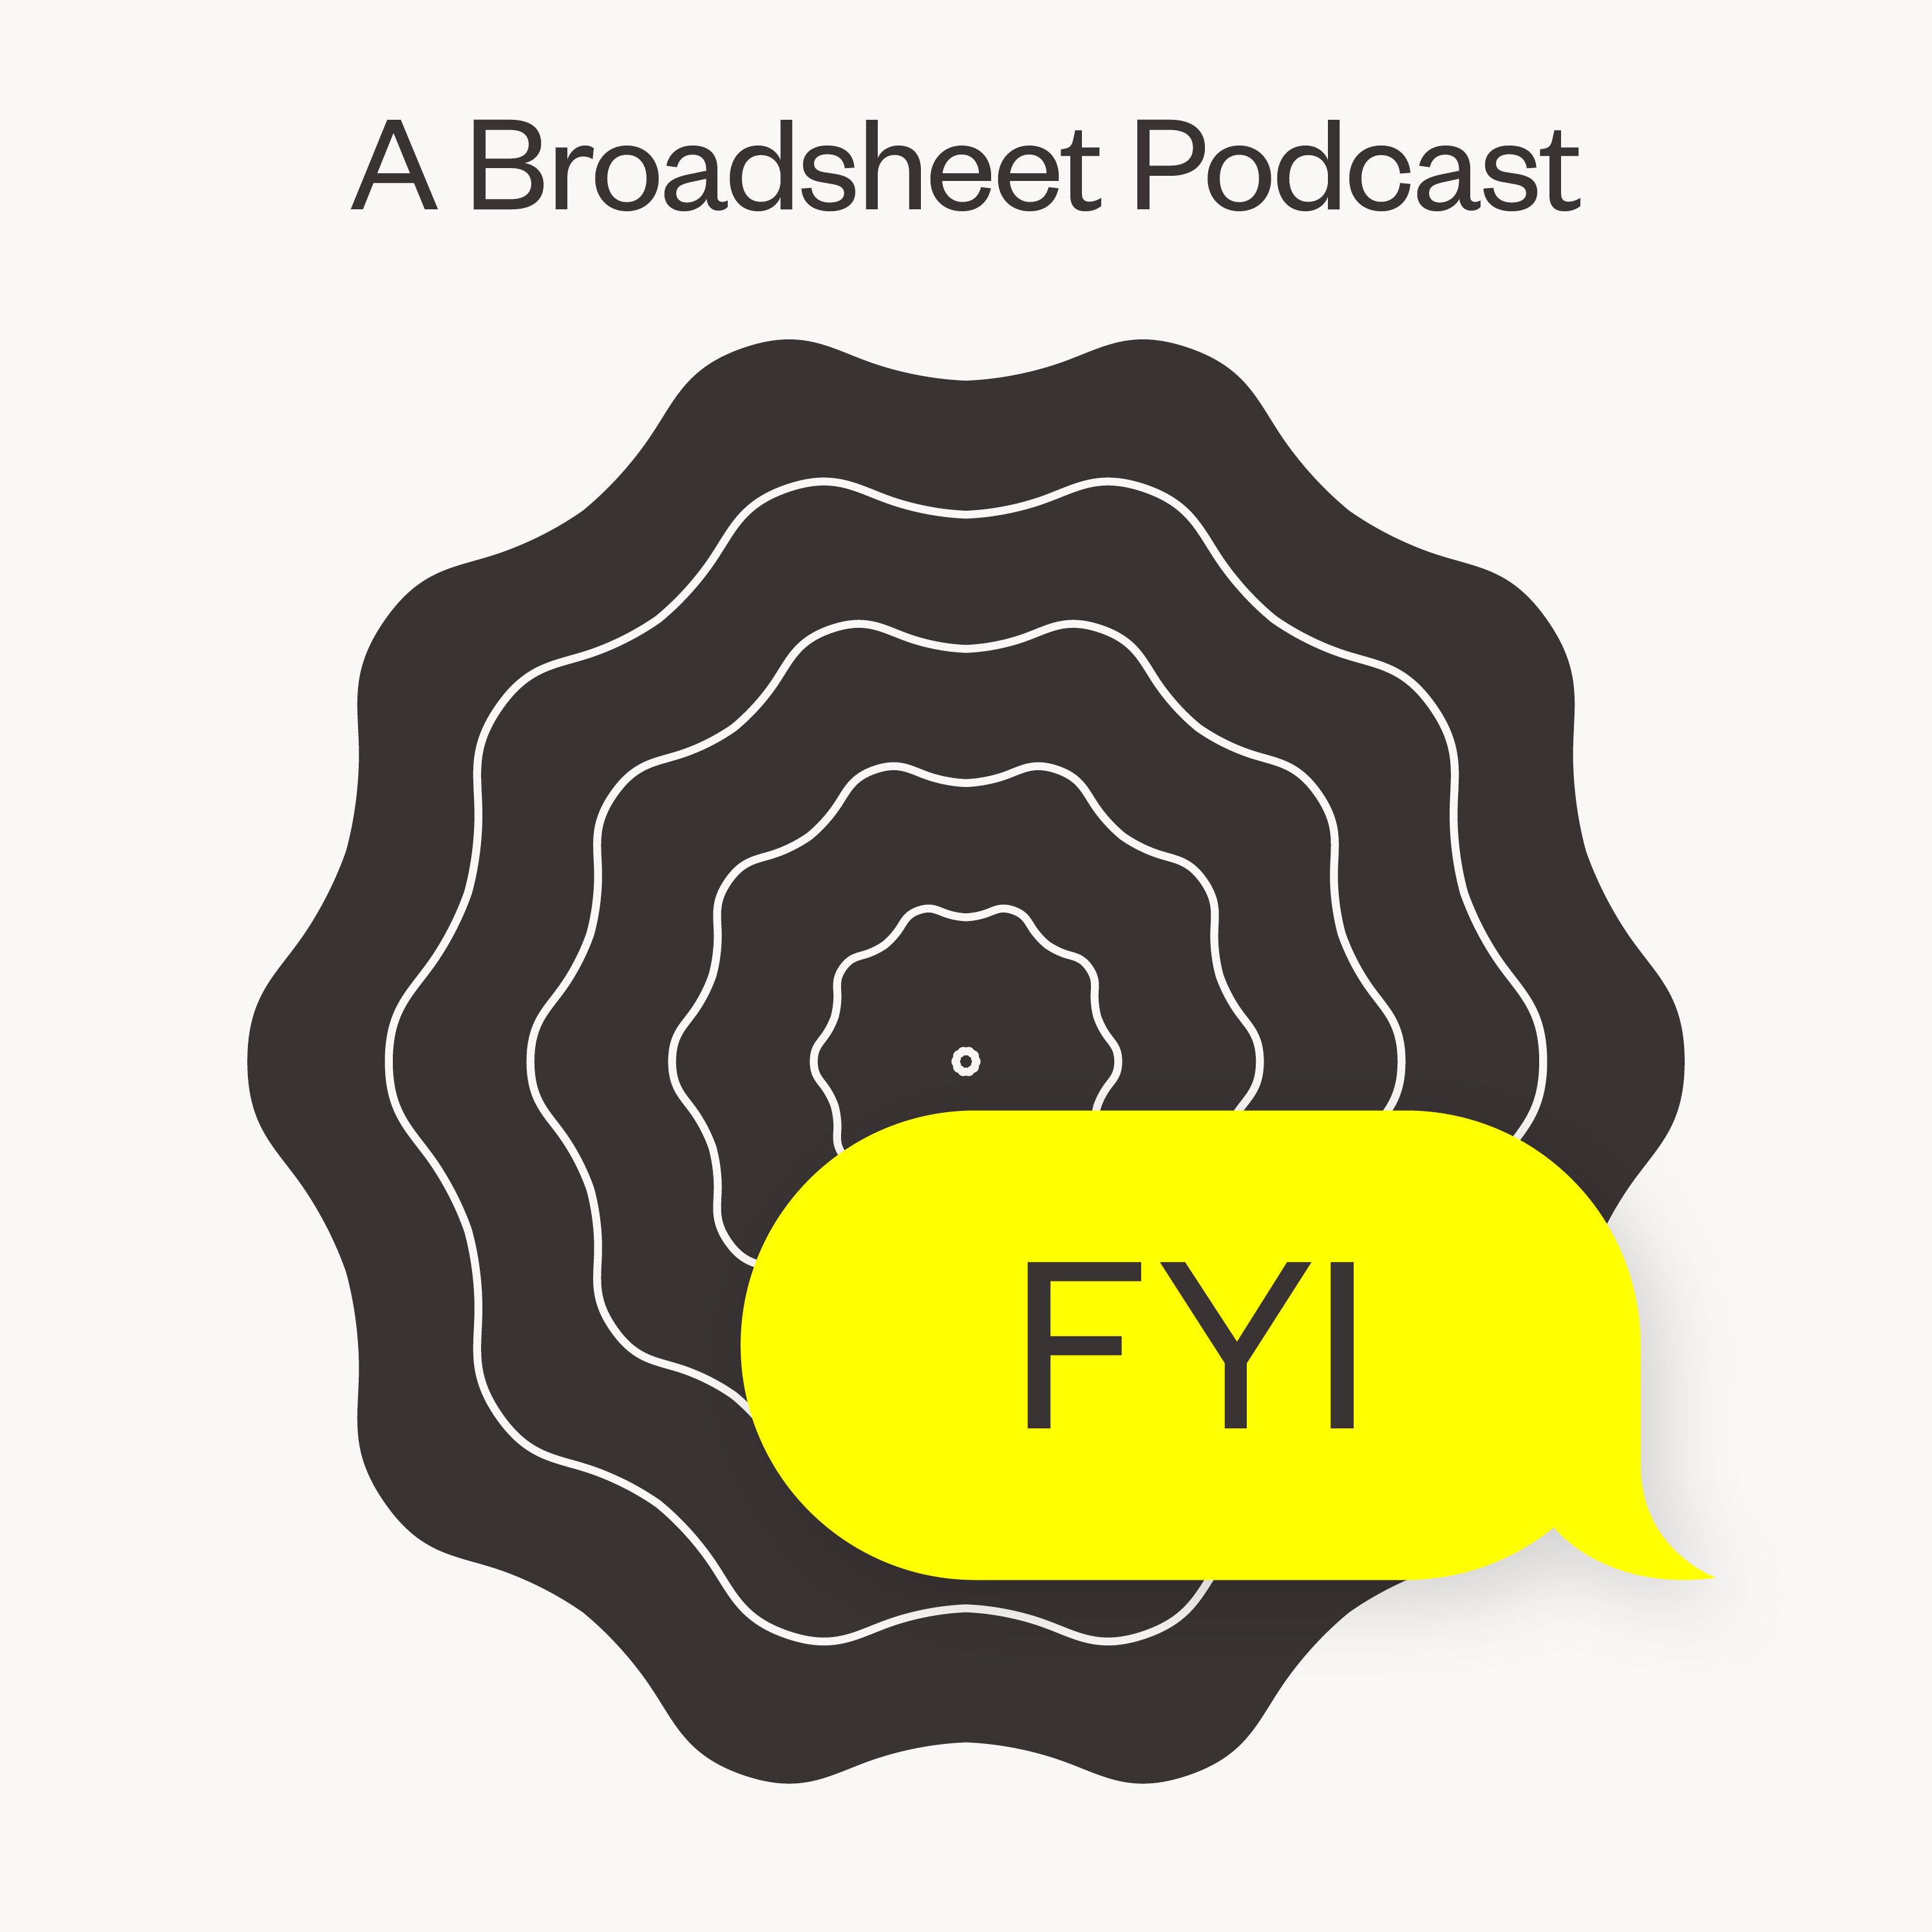 Introducing FYI, a new podcast by Broadsheet